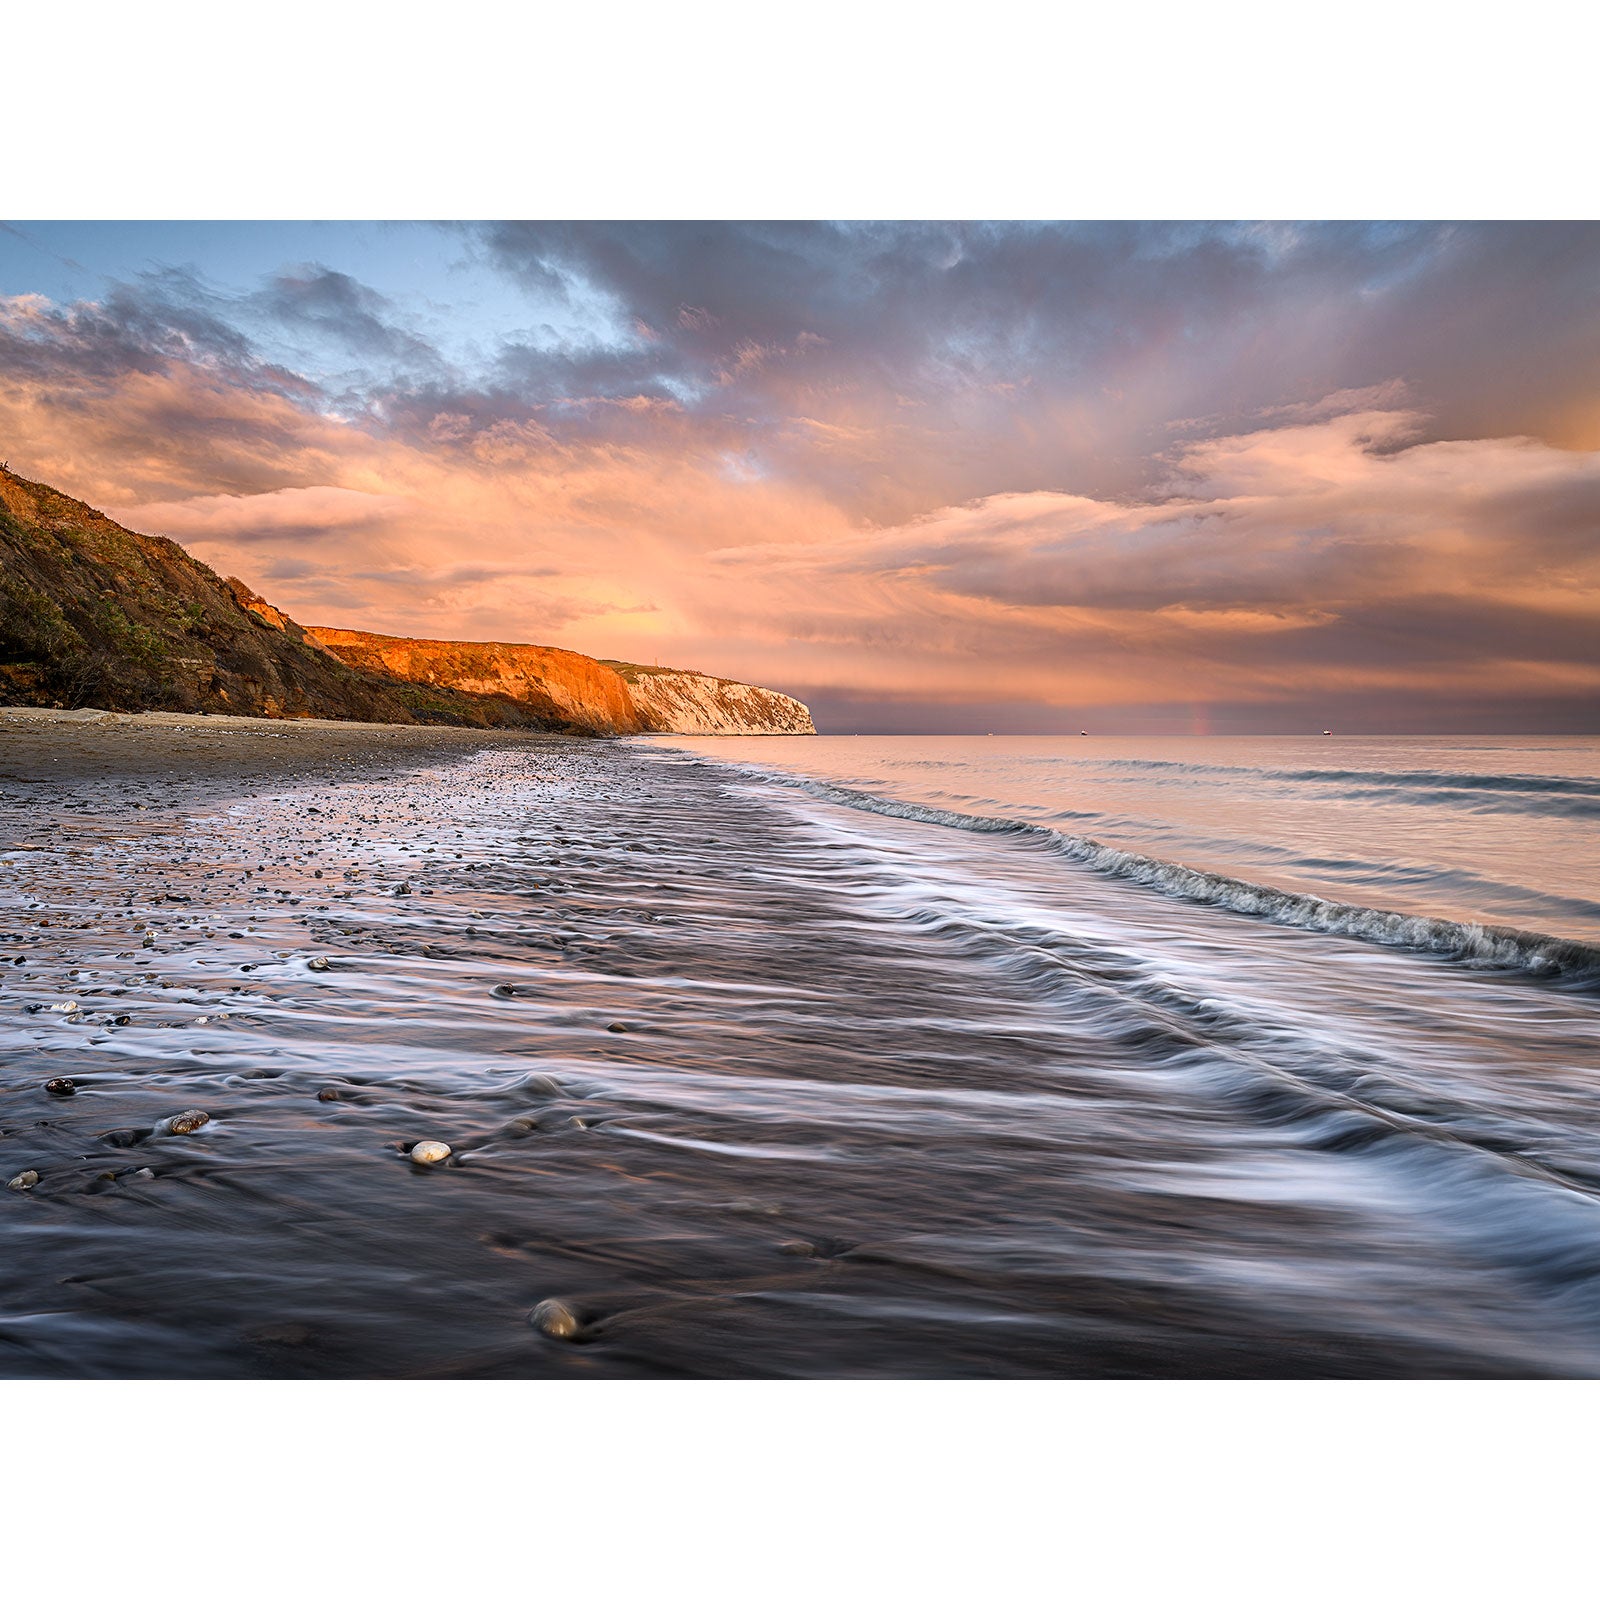 Sunset paints the sky with warm hues over a serene beach on the Isle of Wight, highlighting the contours of Culver Cliff and the gentle wash of waves on the sand. (Product Name: Culver Cliff, Brand Name: Available Light Photography)